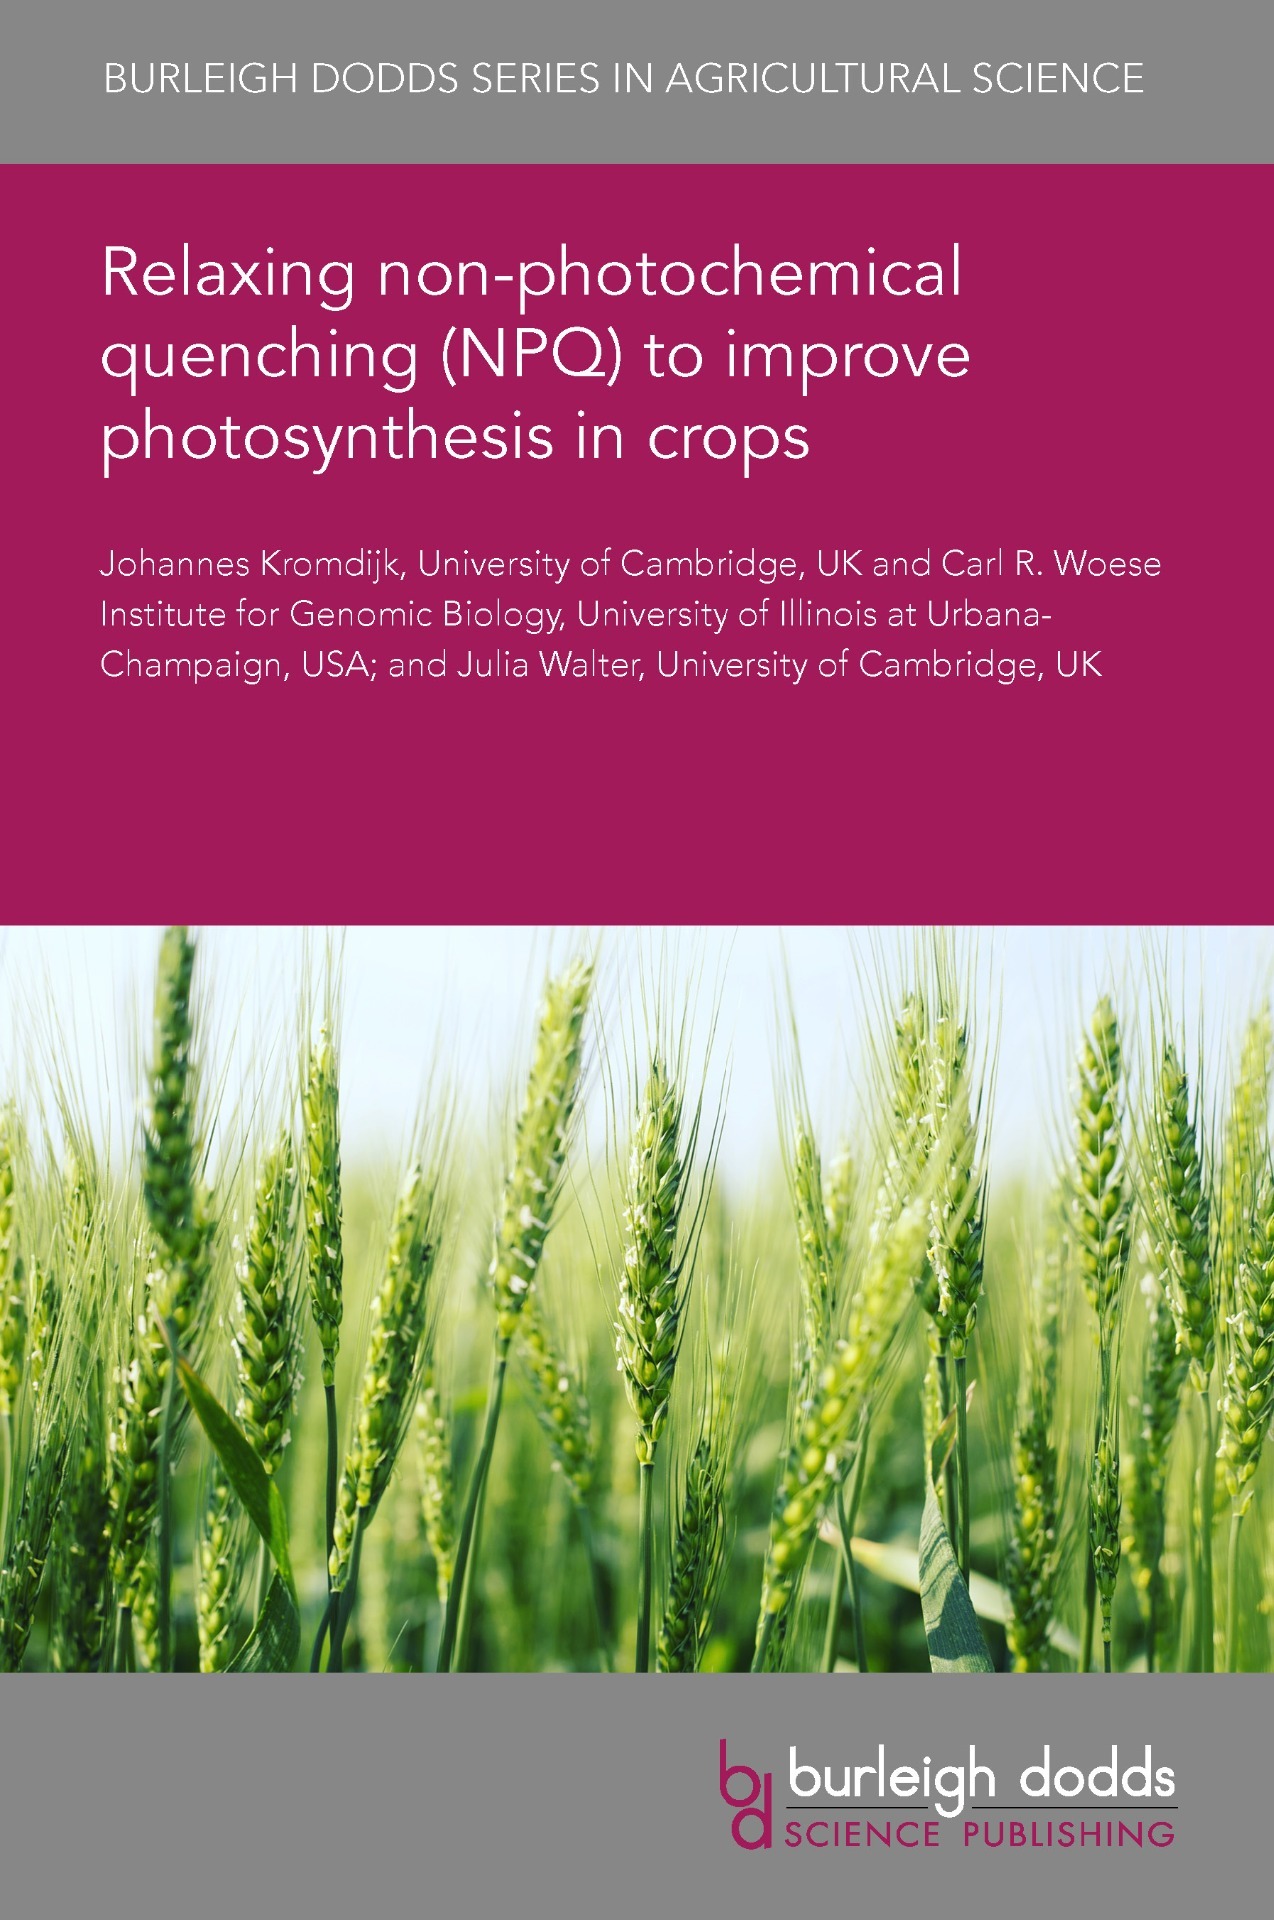 Relaxing non-photochemical quenching (NPQ) to improve photosynthesis in crops